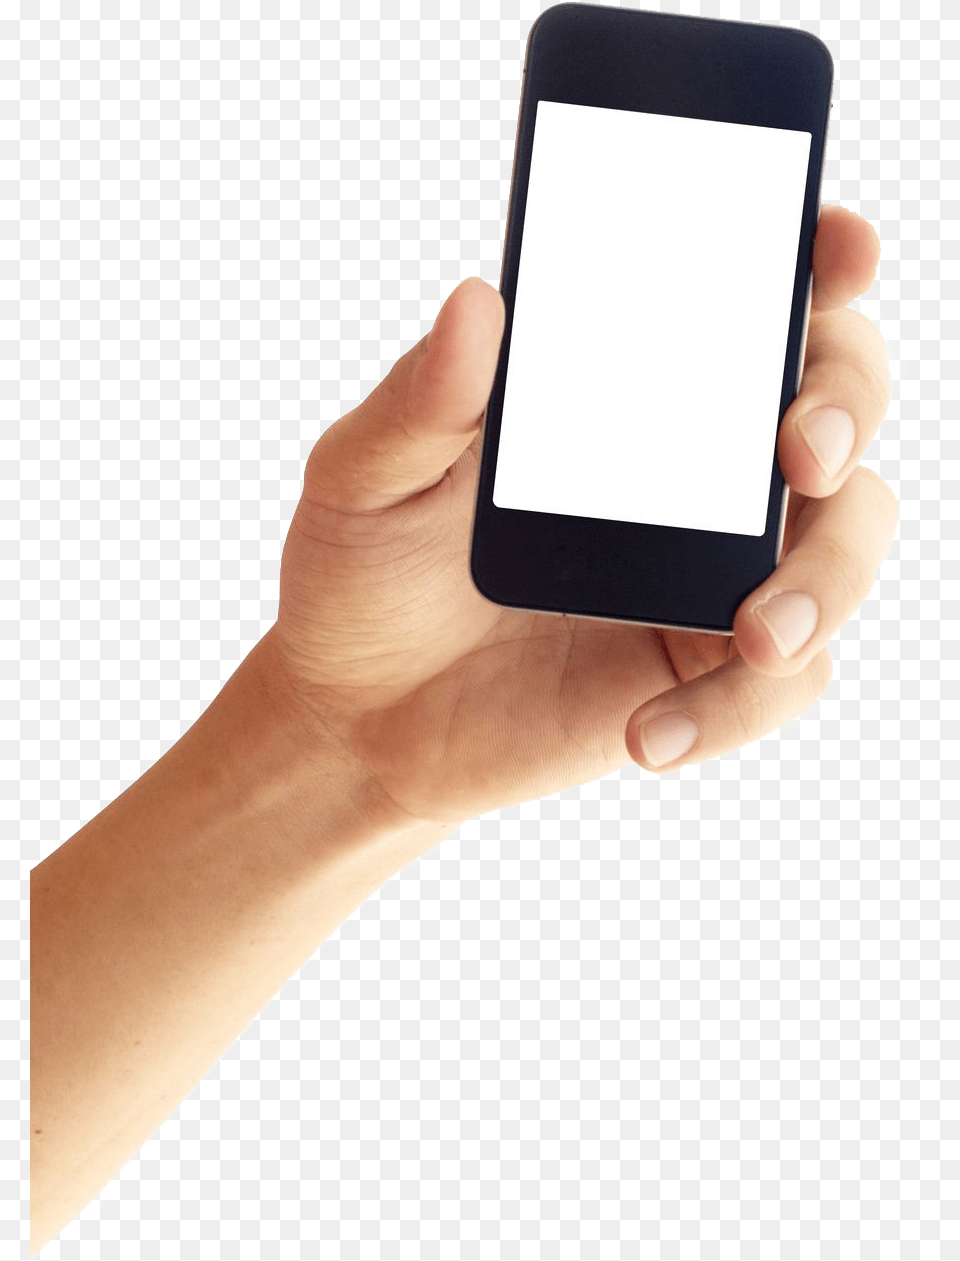 Download Phone In Hand Image For Free Central De Alarme Amt 1016 Net, Electronics, Mobile Phone, Computer Png